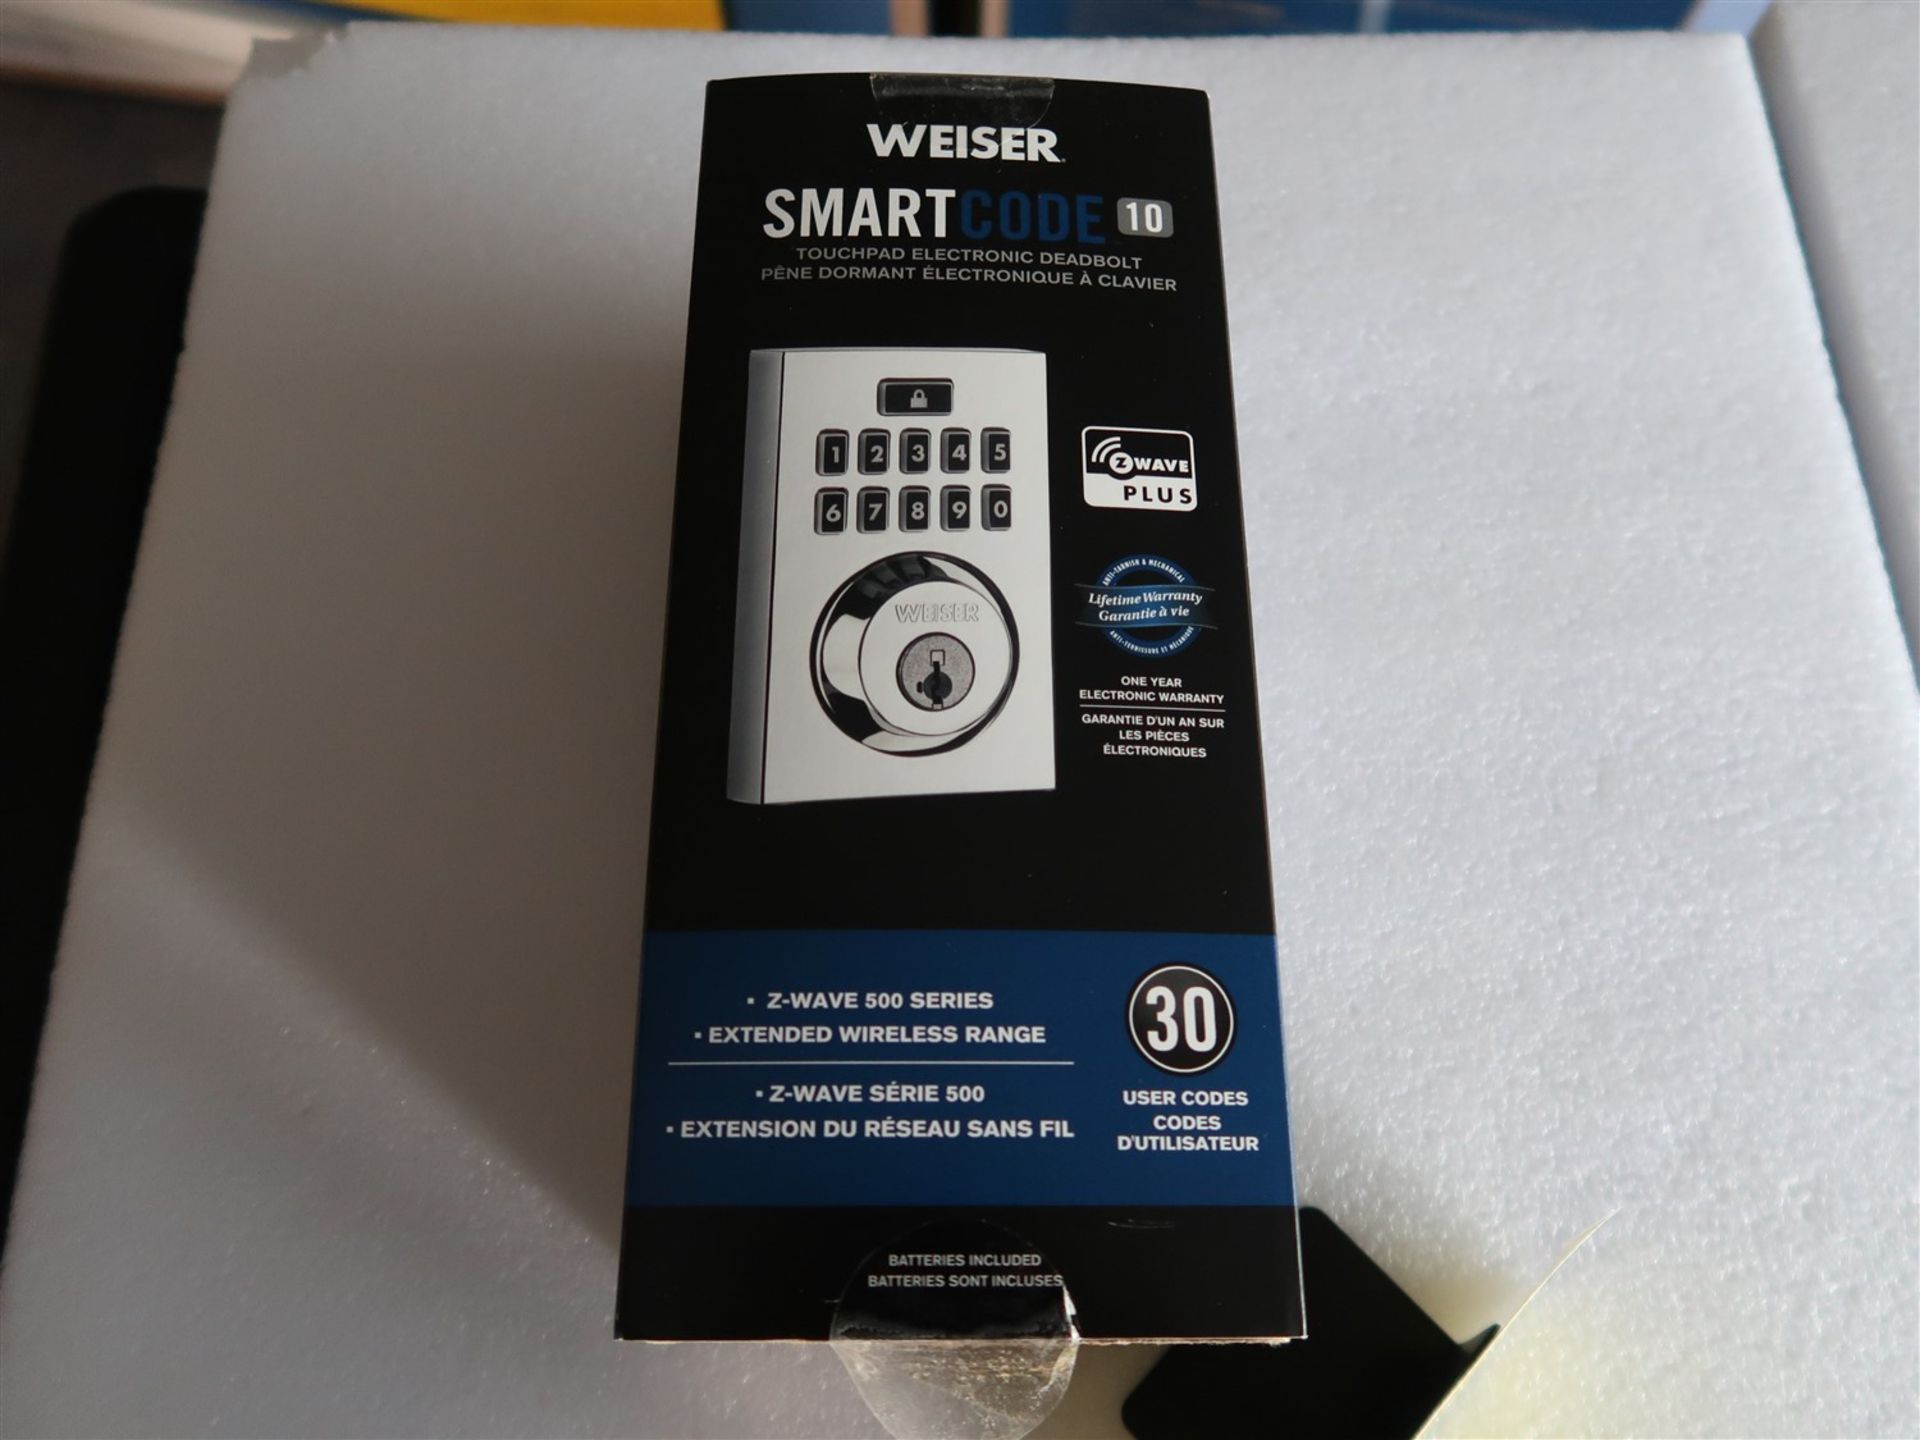 WEISER SMART CODE 10 TOUCH PAD ELECTRONIC DEAD BOLT 9GED 18000-014, (BNIB) - Image 2 of 3